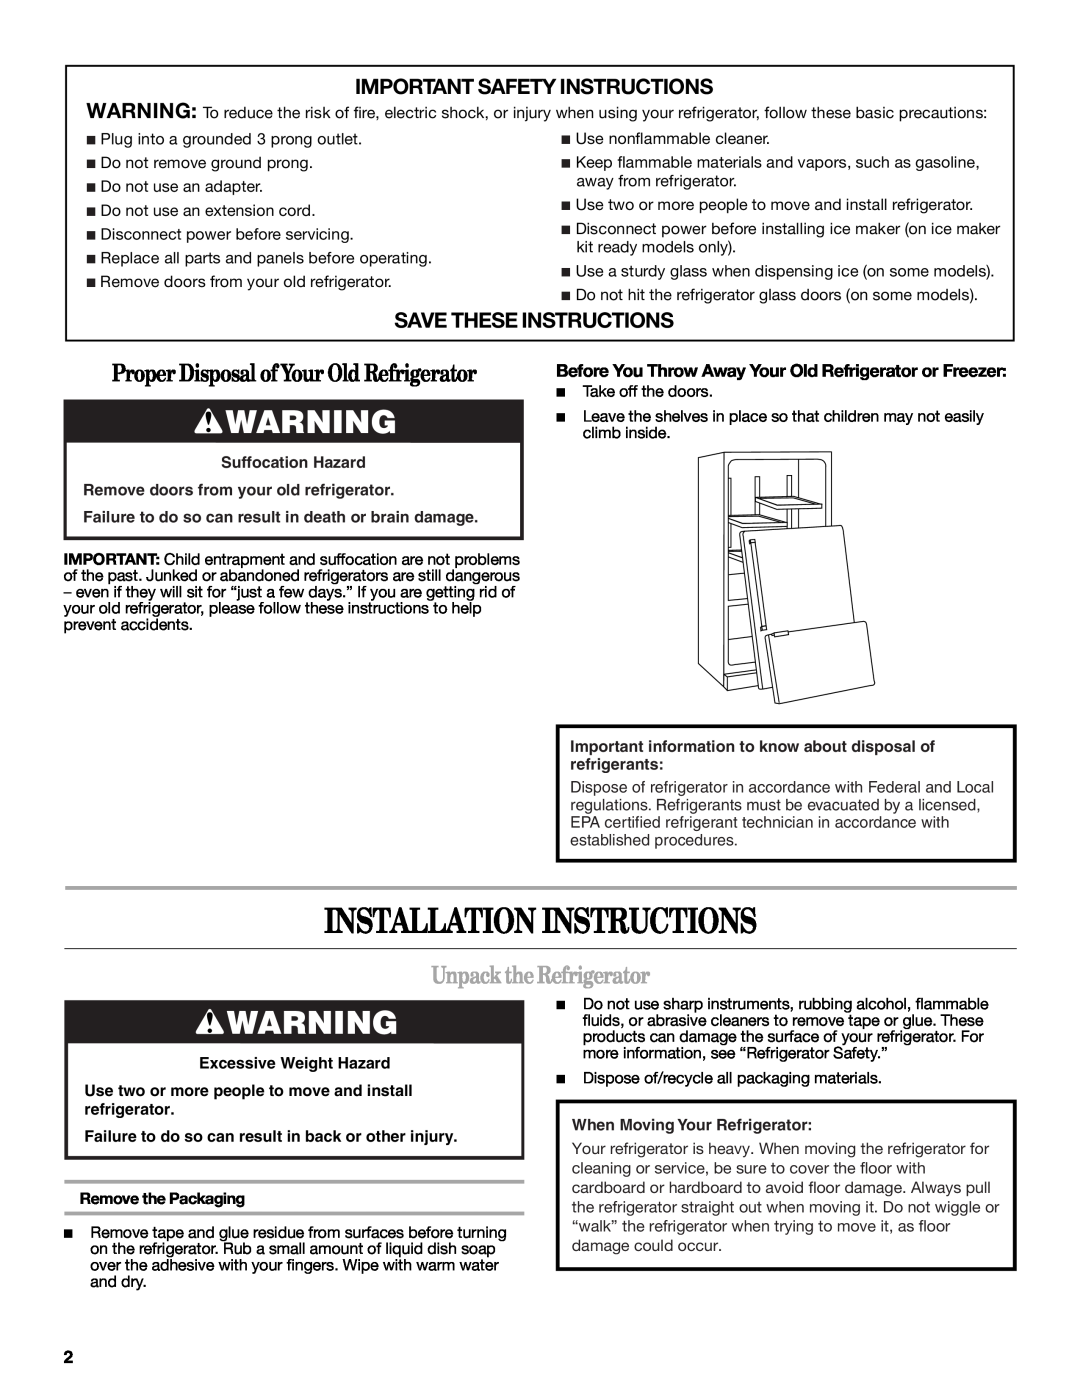 Amana W10366212A Installation Instructions, Unpack the Refrigerator, Important Safety Instructions, Remove the Packaging 